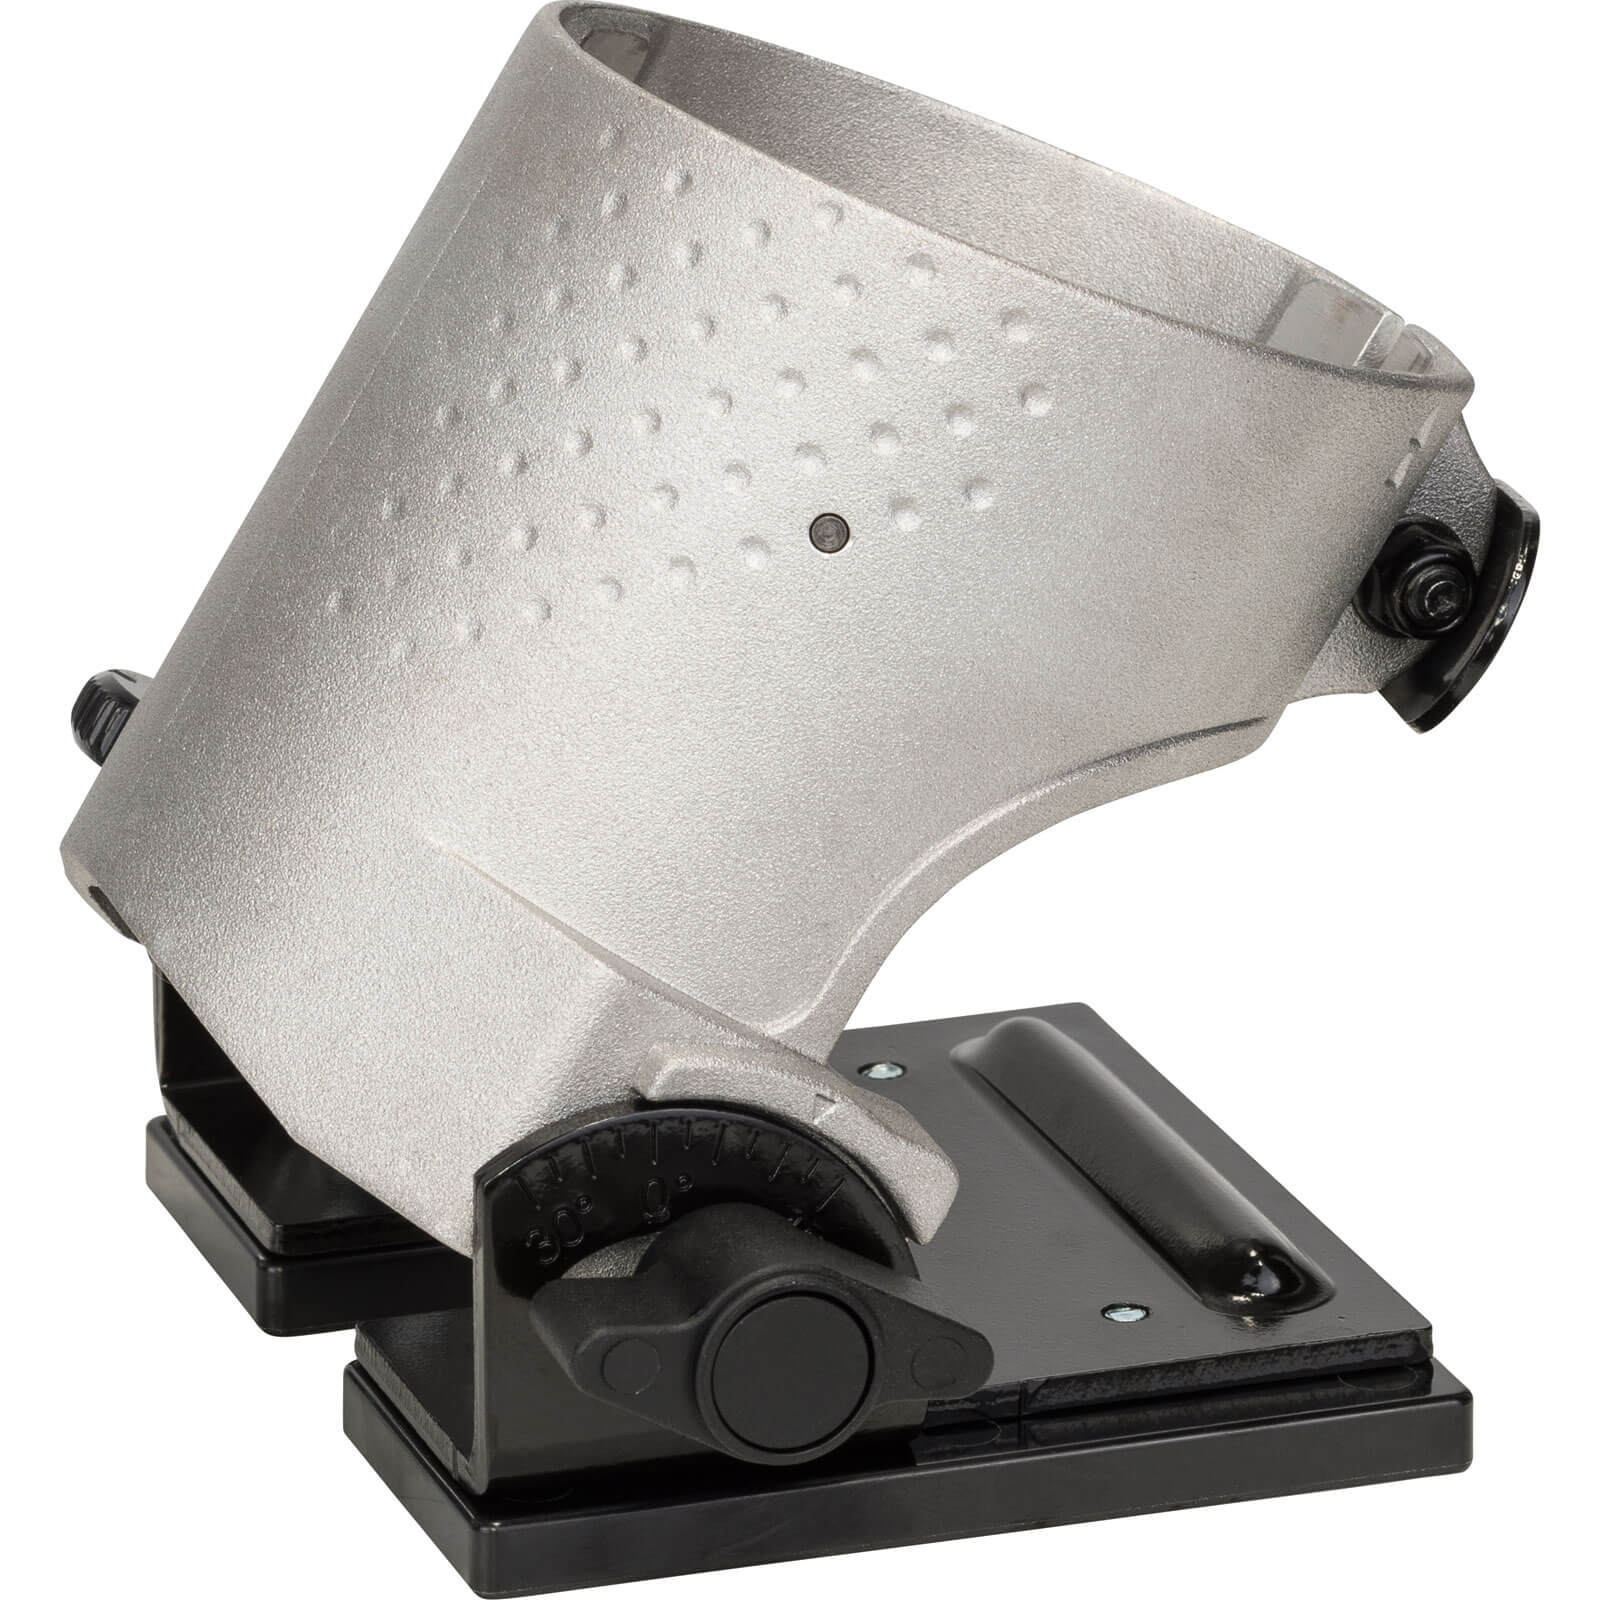 Image of Bosch Adjustable Angle Base for GKF 600 Router